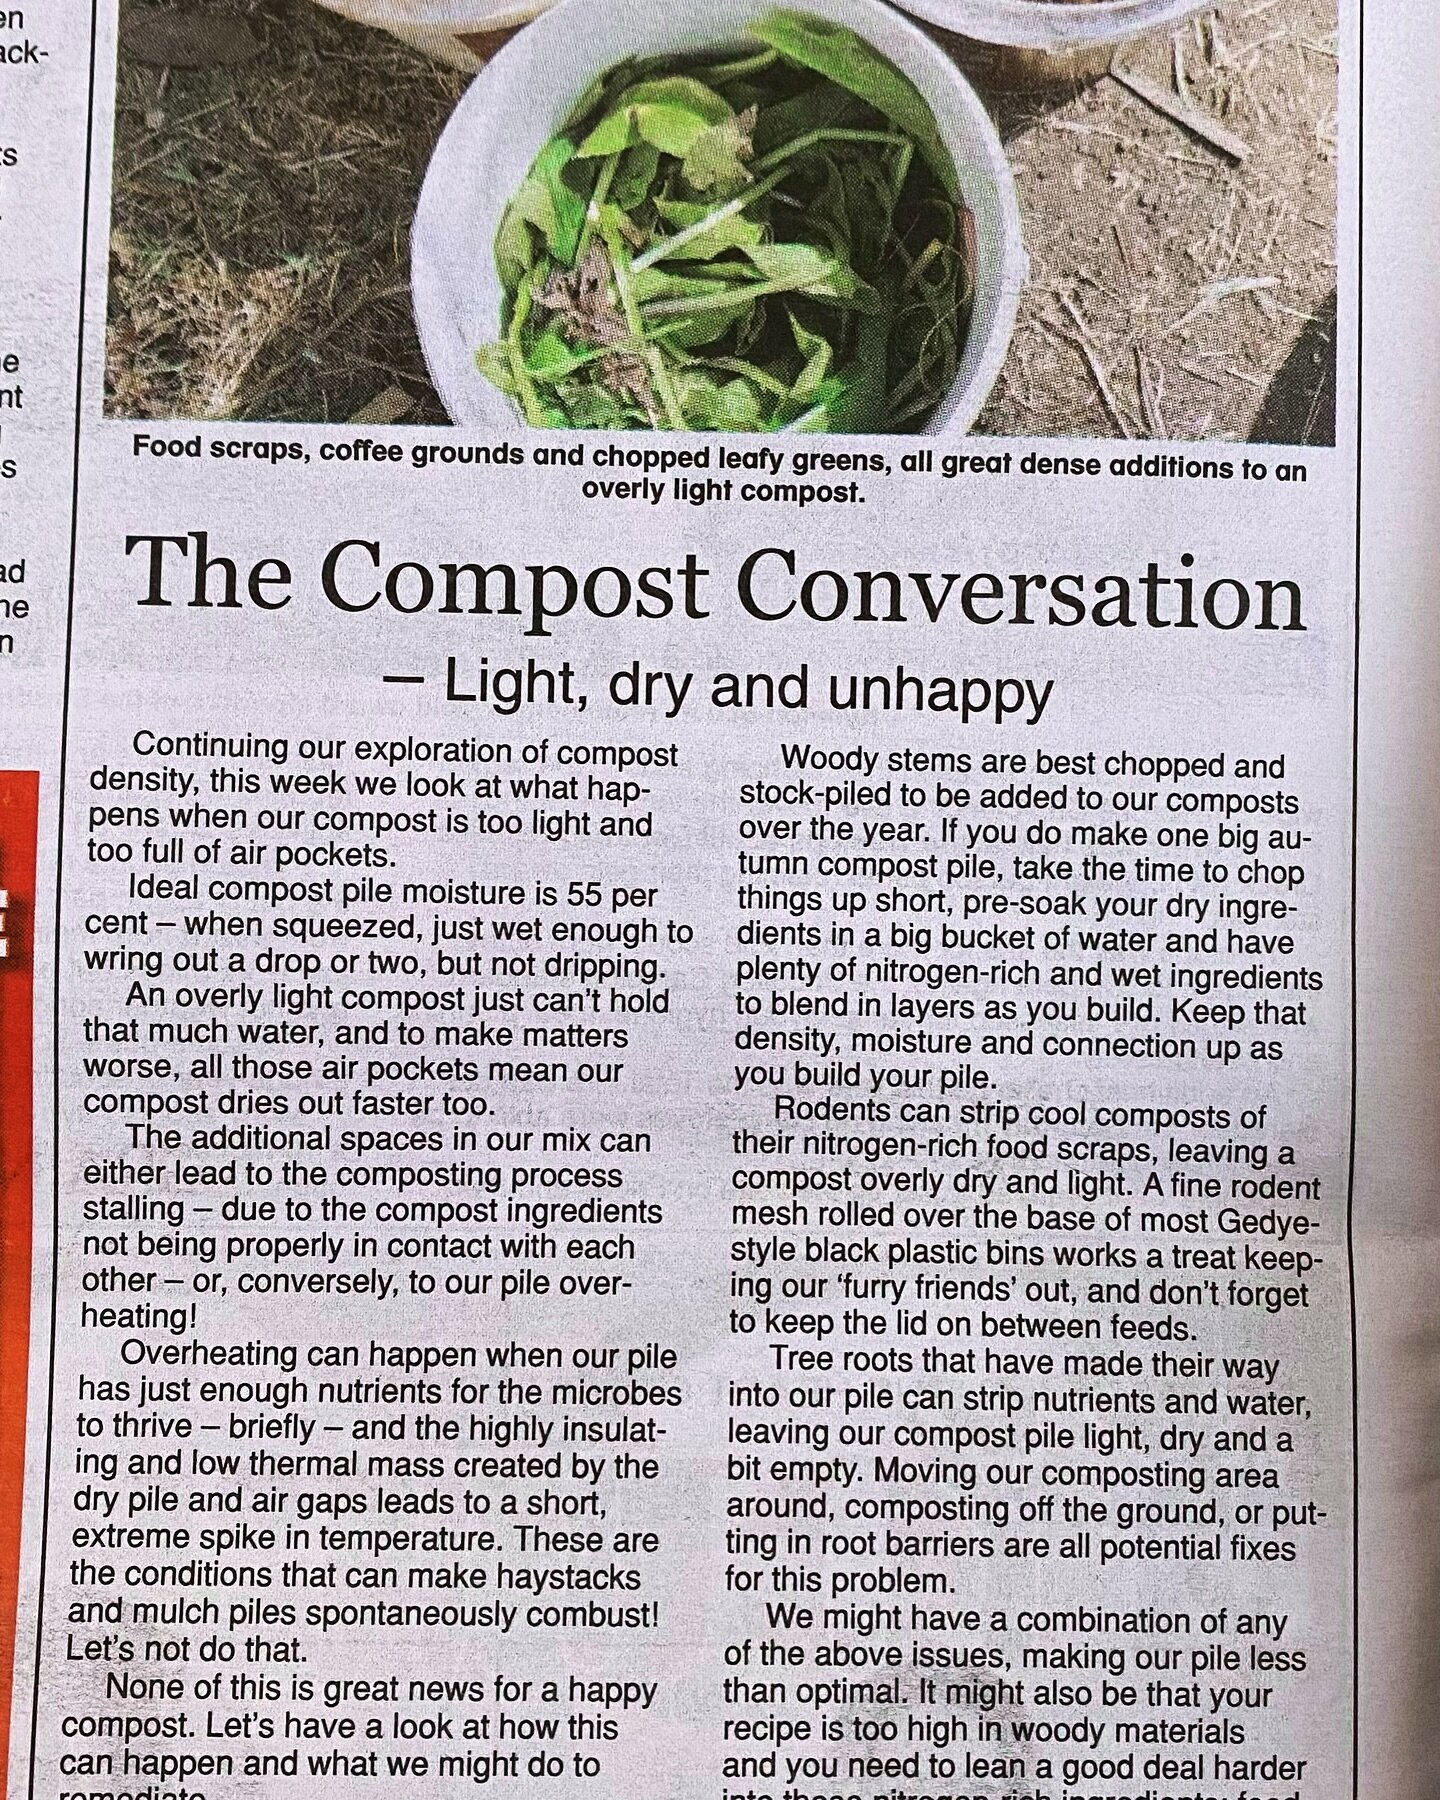 I&rsquo;ve lost count of these columns! So much to talk about on the way to great compost&hellip; we are getting more questions rolling in&hellip; keep &lsquo;em coming! 

This week we discuss the Goldilocks of density, not too light, not too dry, bu